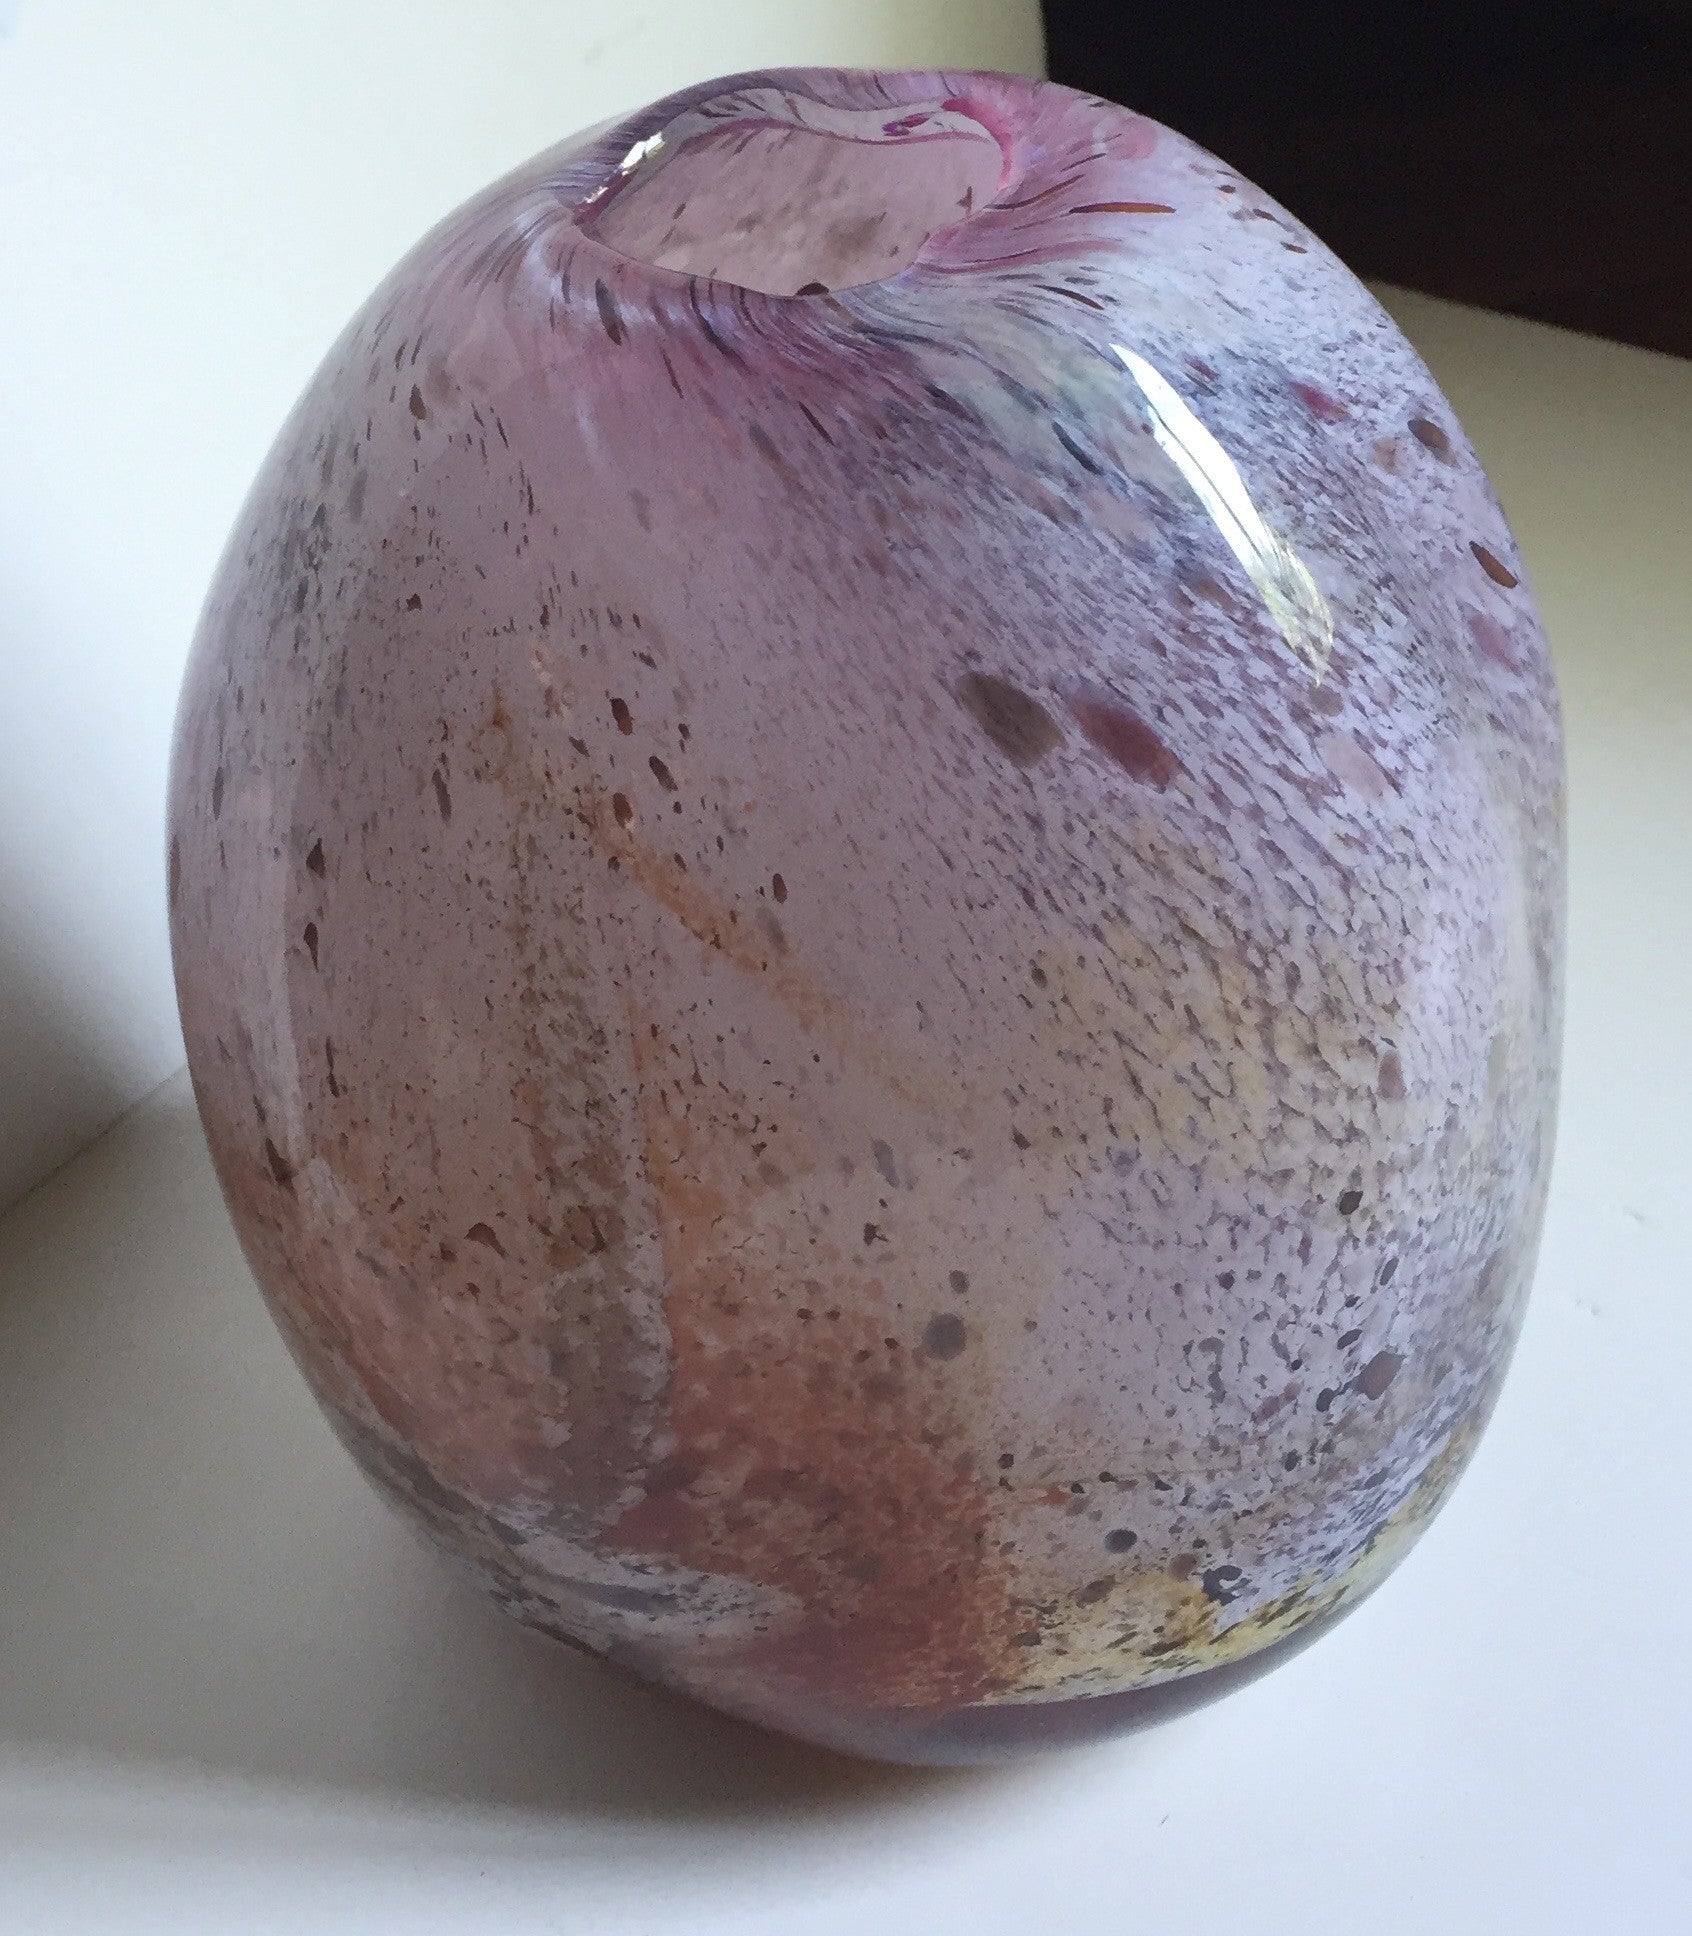 SOLD Contemporary Studio Glass Vase, Pink with flecks of color